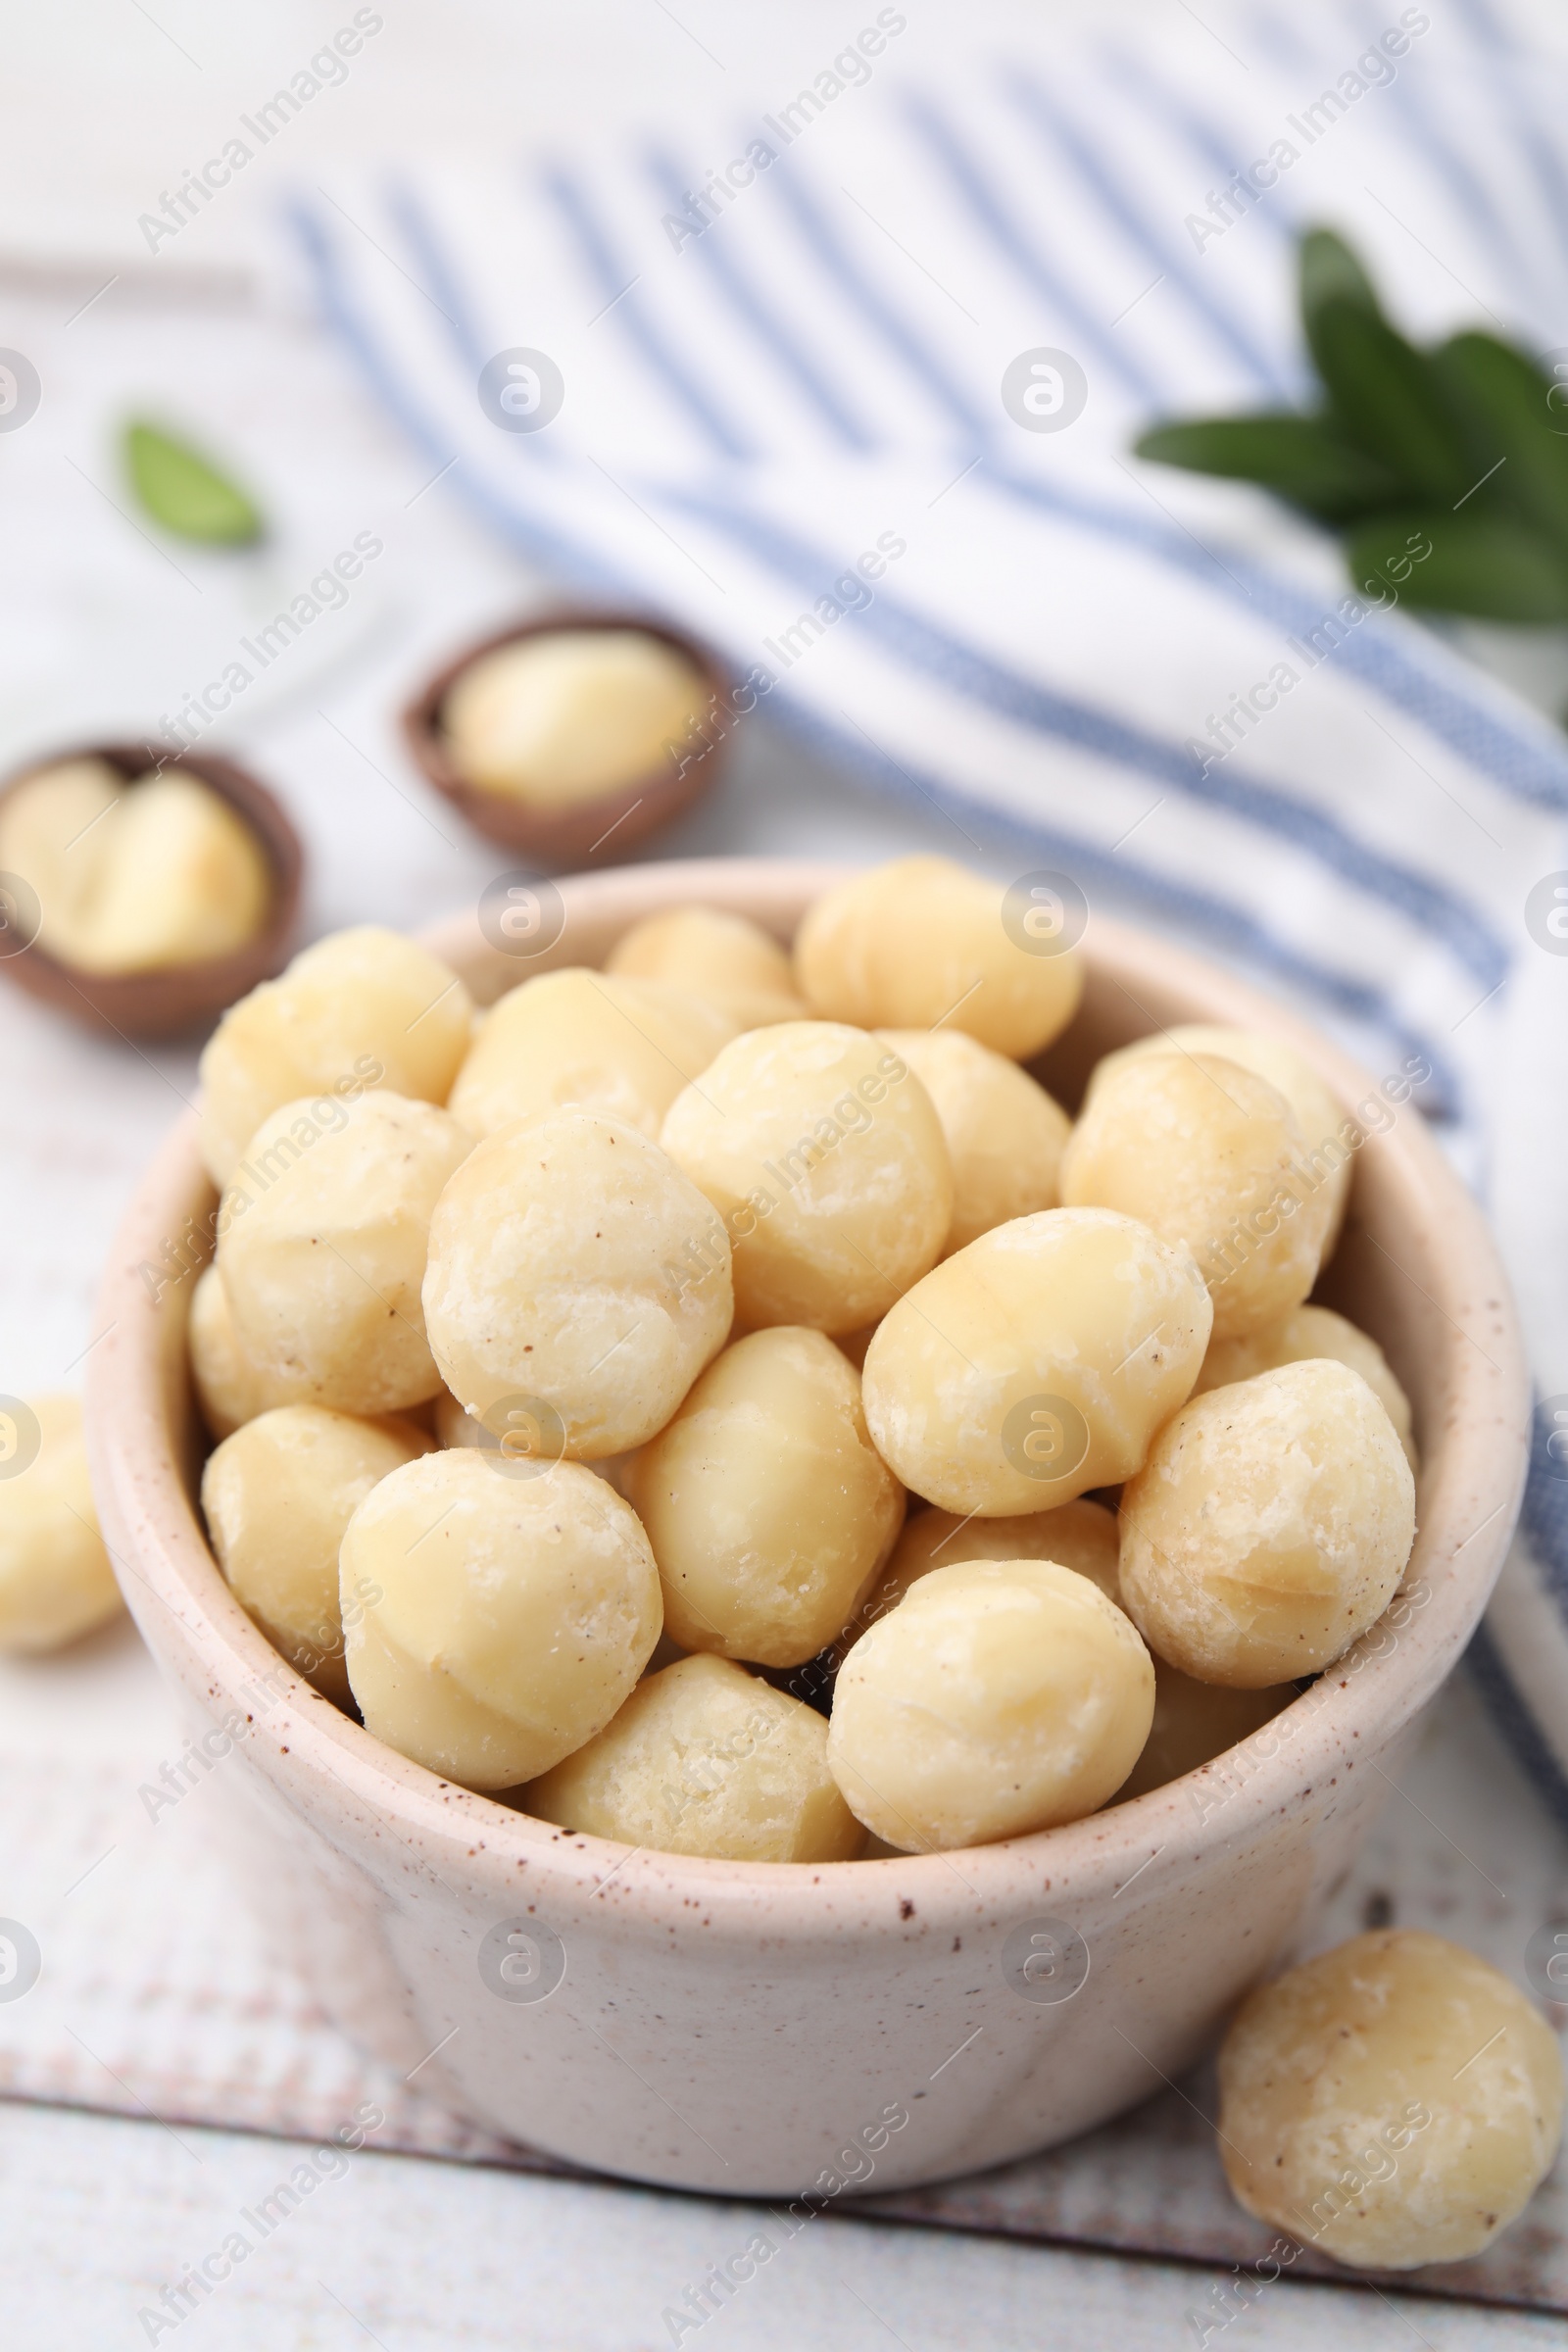 Photo of Tasty peeled Macadamia nuts in bowl on light table